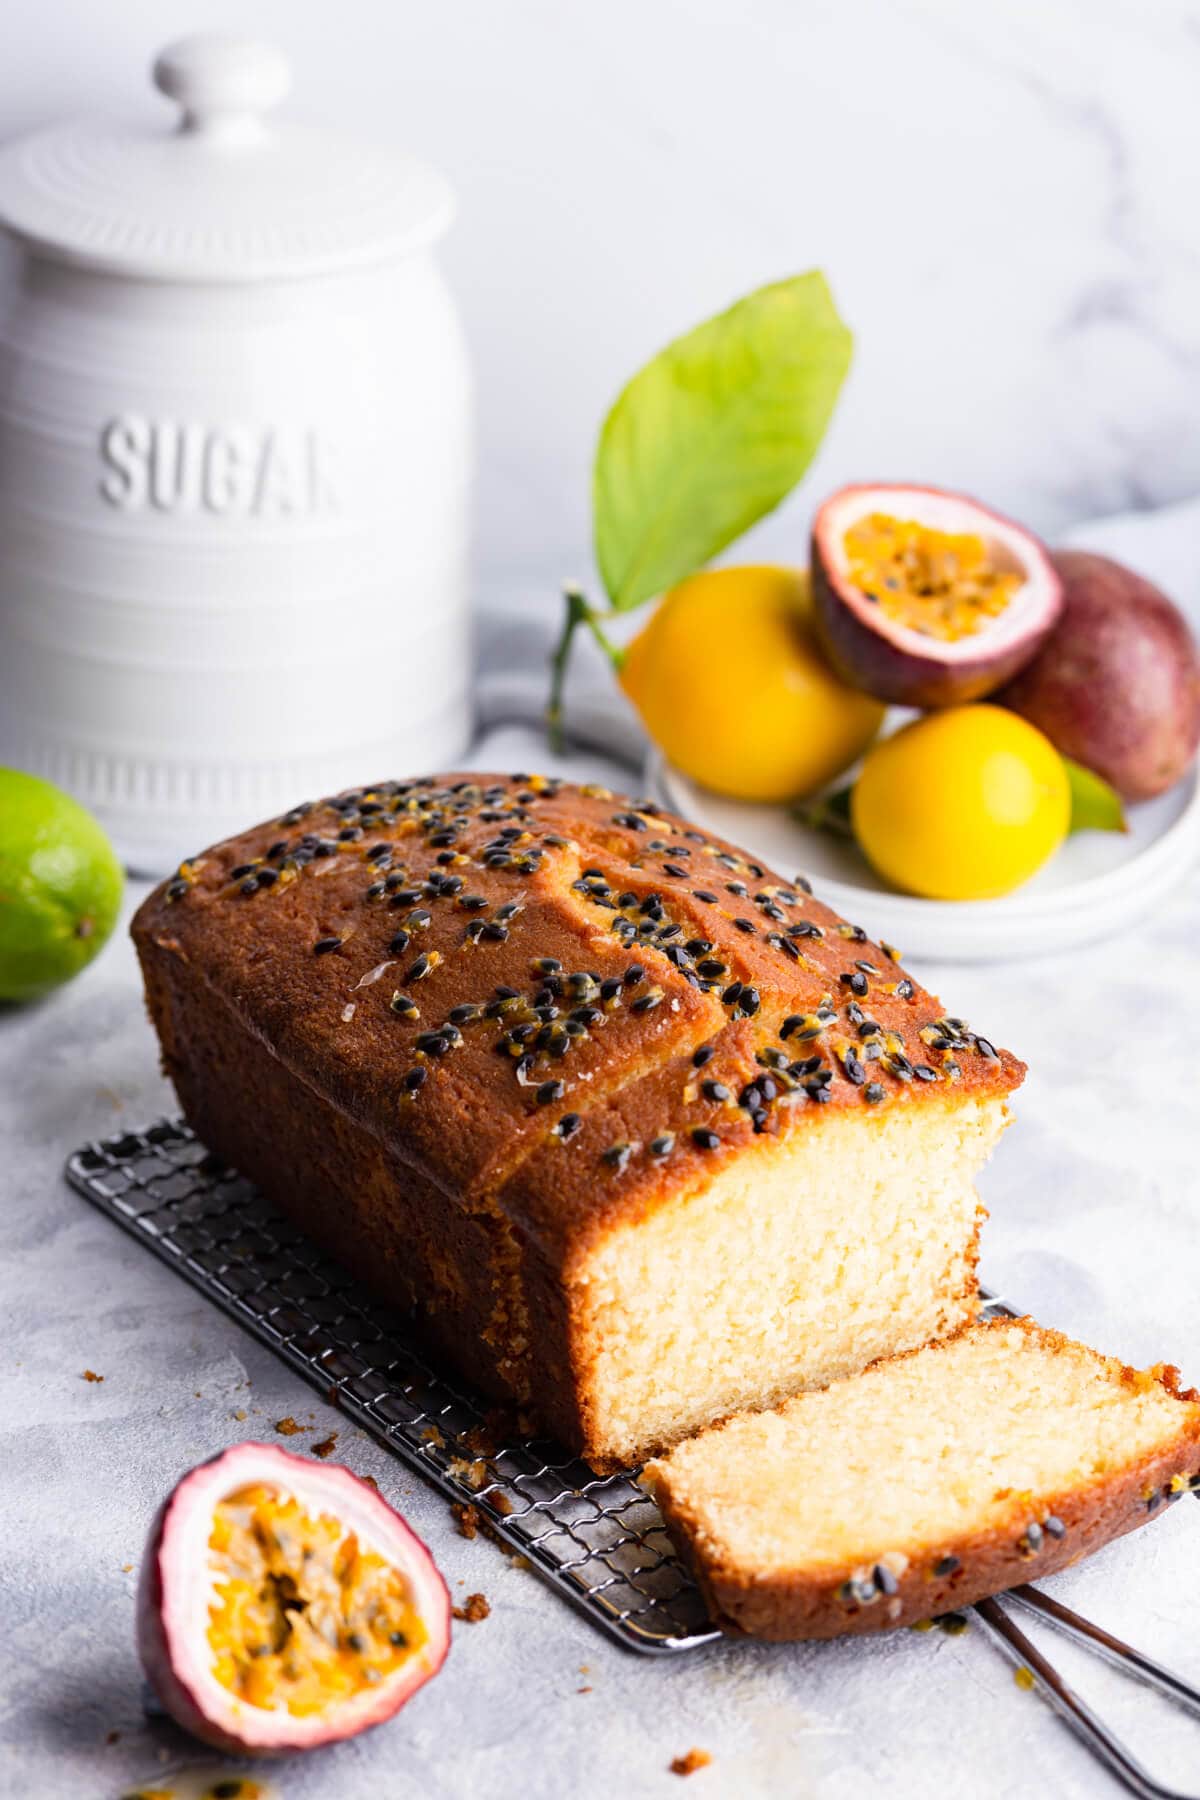 45 degree angle view of a loaf cake topped with passion fruit seeds